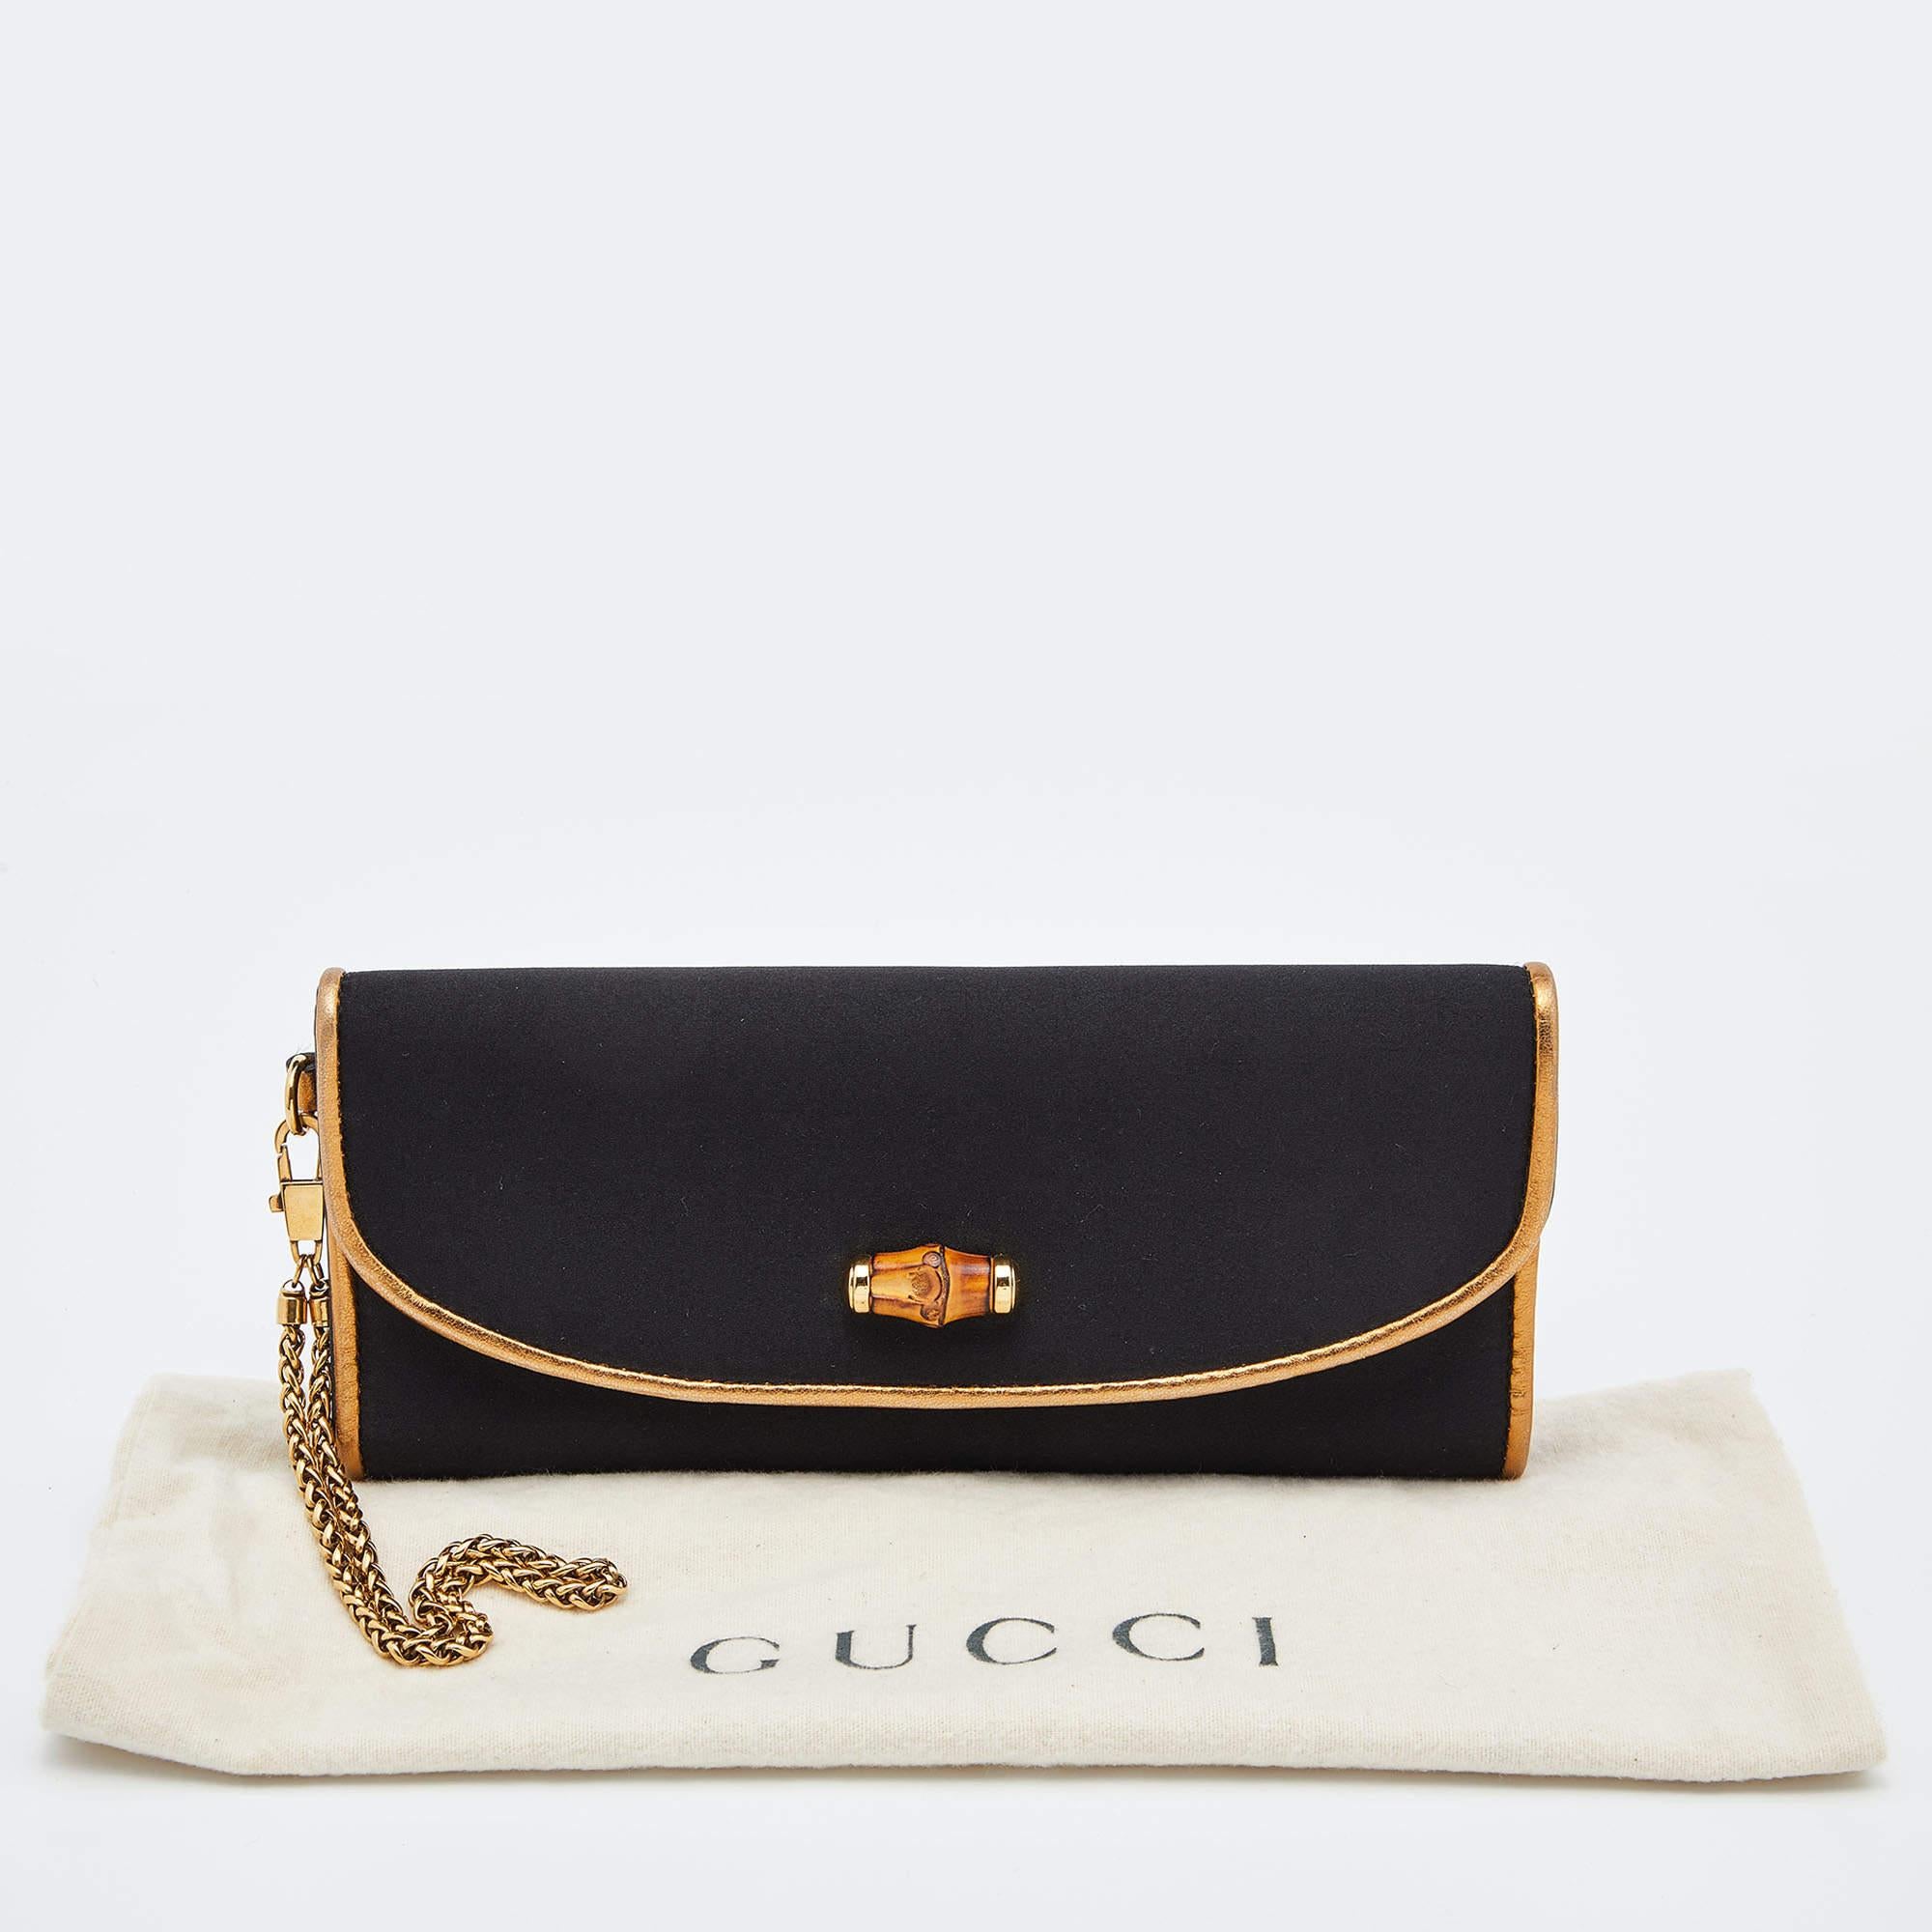 Gucci Black Satin and Leather Wristlet Clutch 9